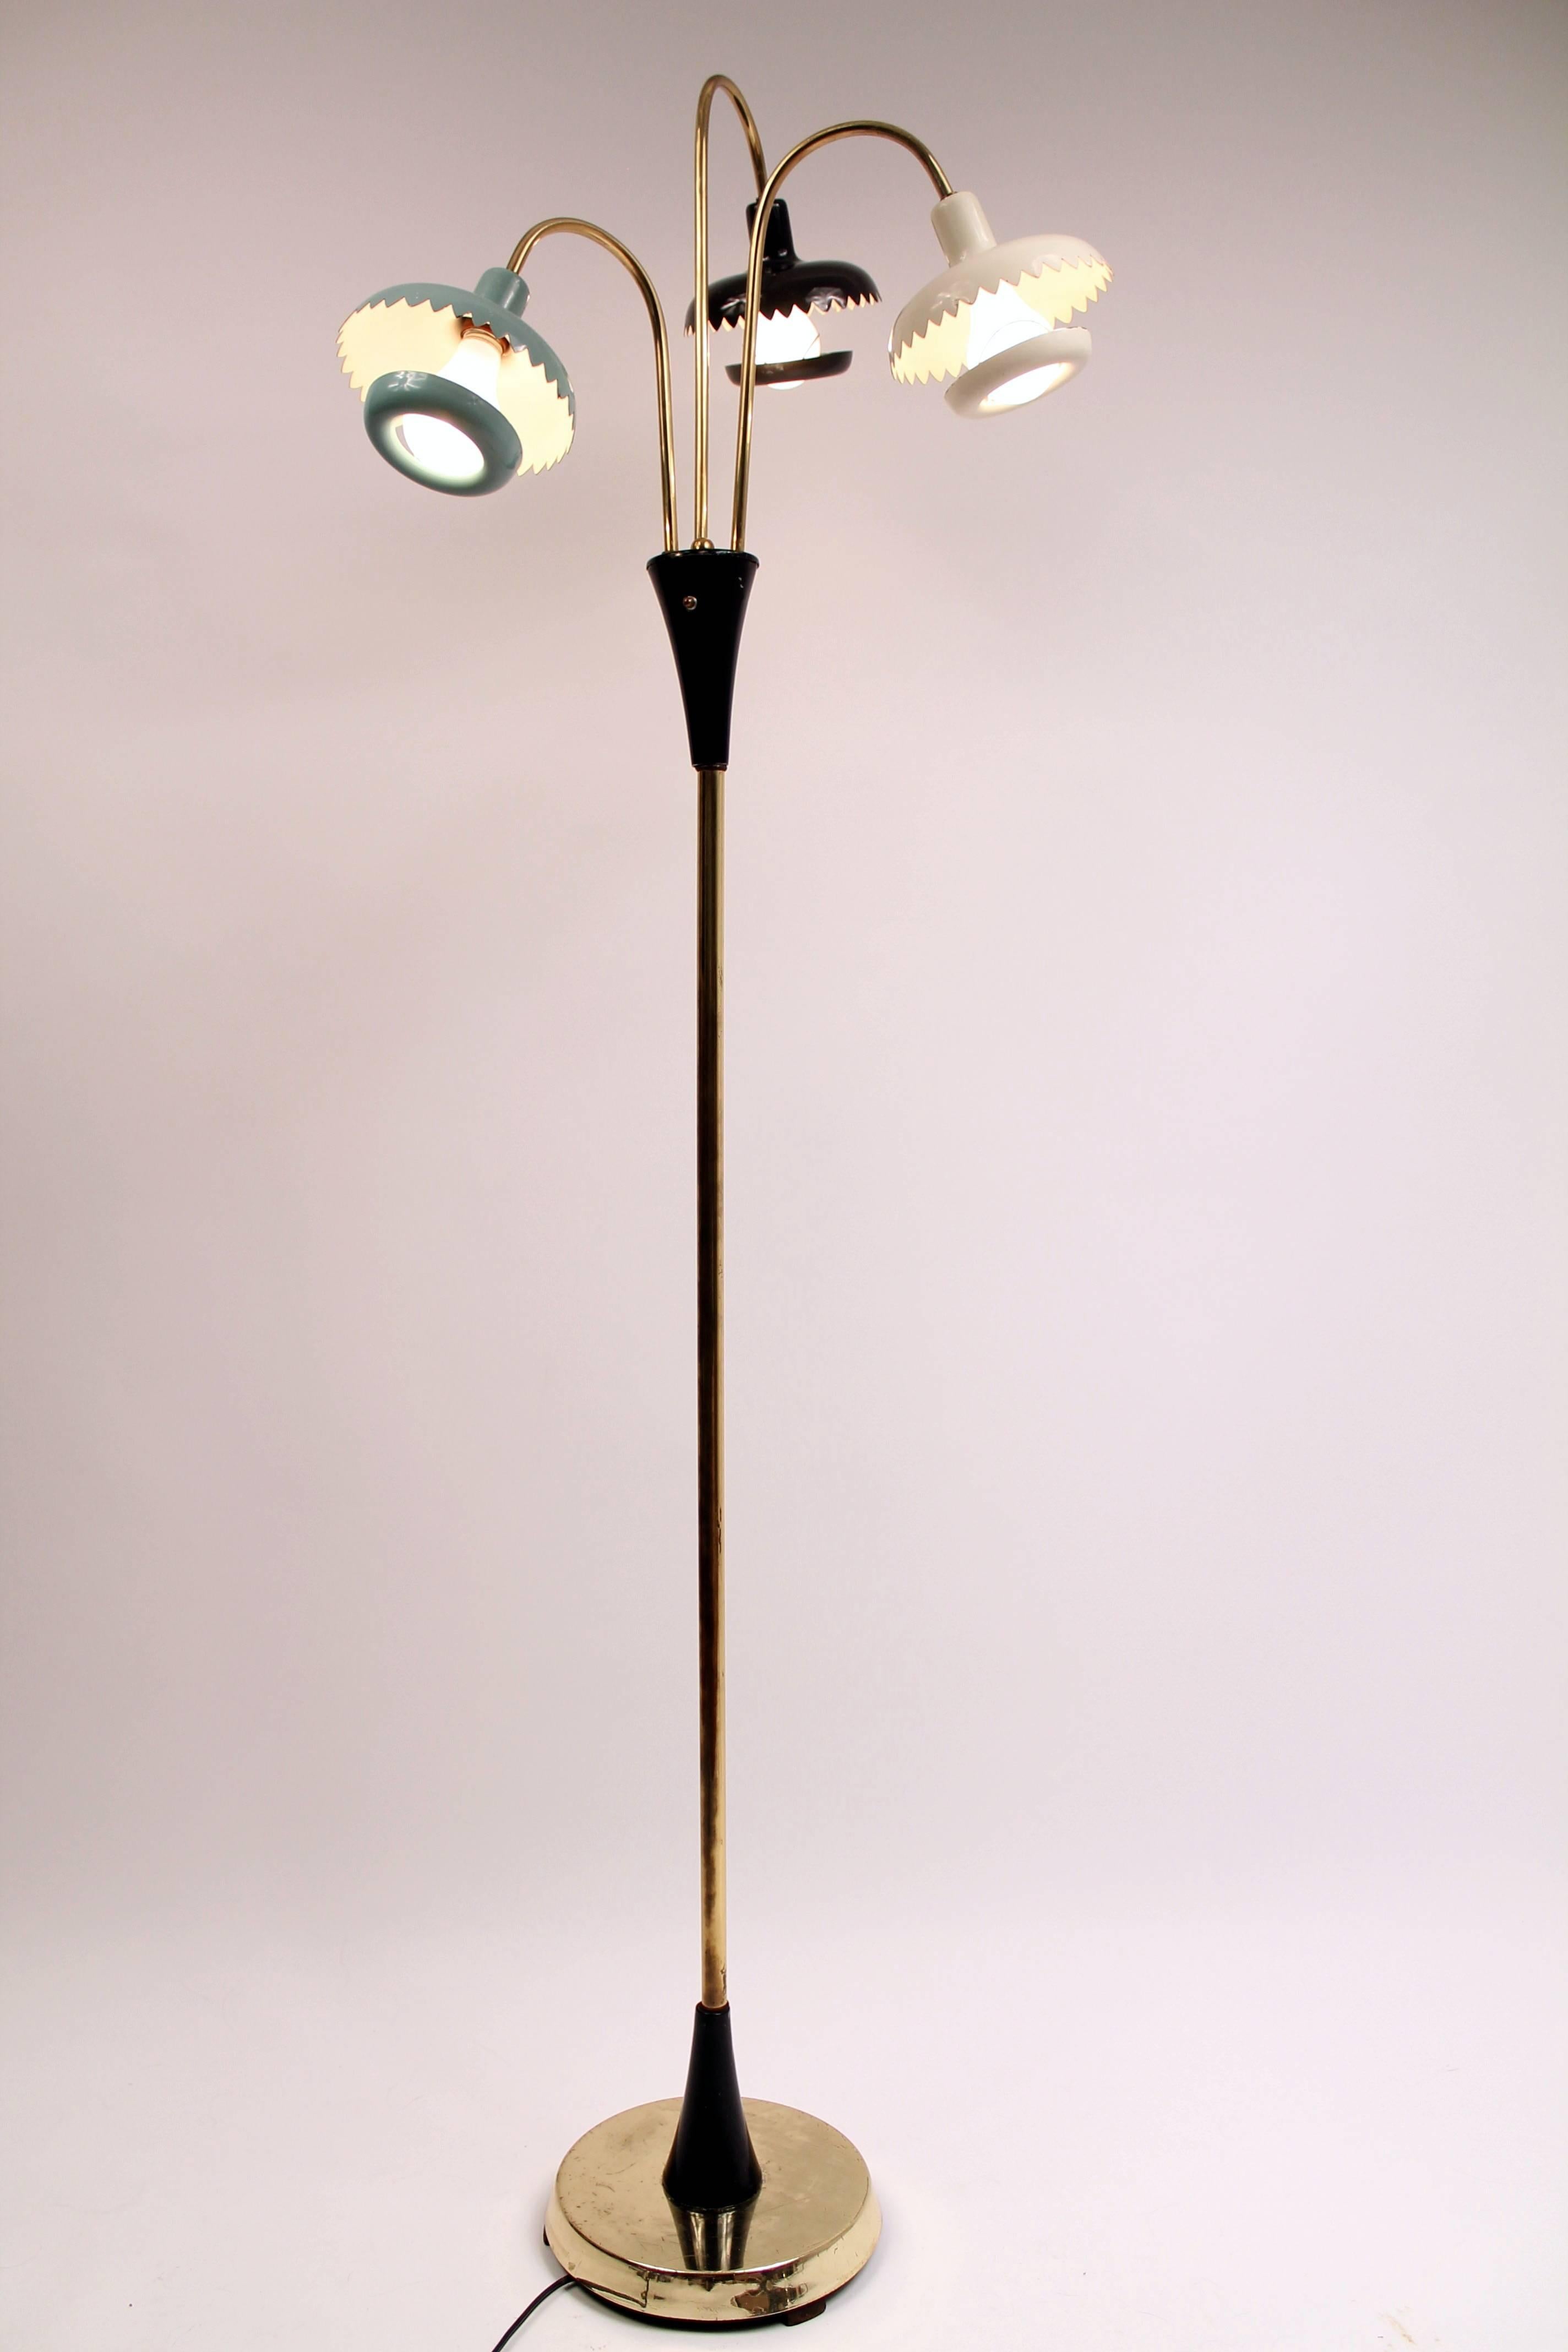 Three enameled metal heads and hooked cup on light bulb in primary color. Brass stem. Main pole and base are brass plated. 

Measure 64 inches tall.

Rotating switch control one, two or three lights.